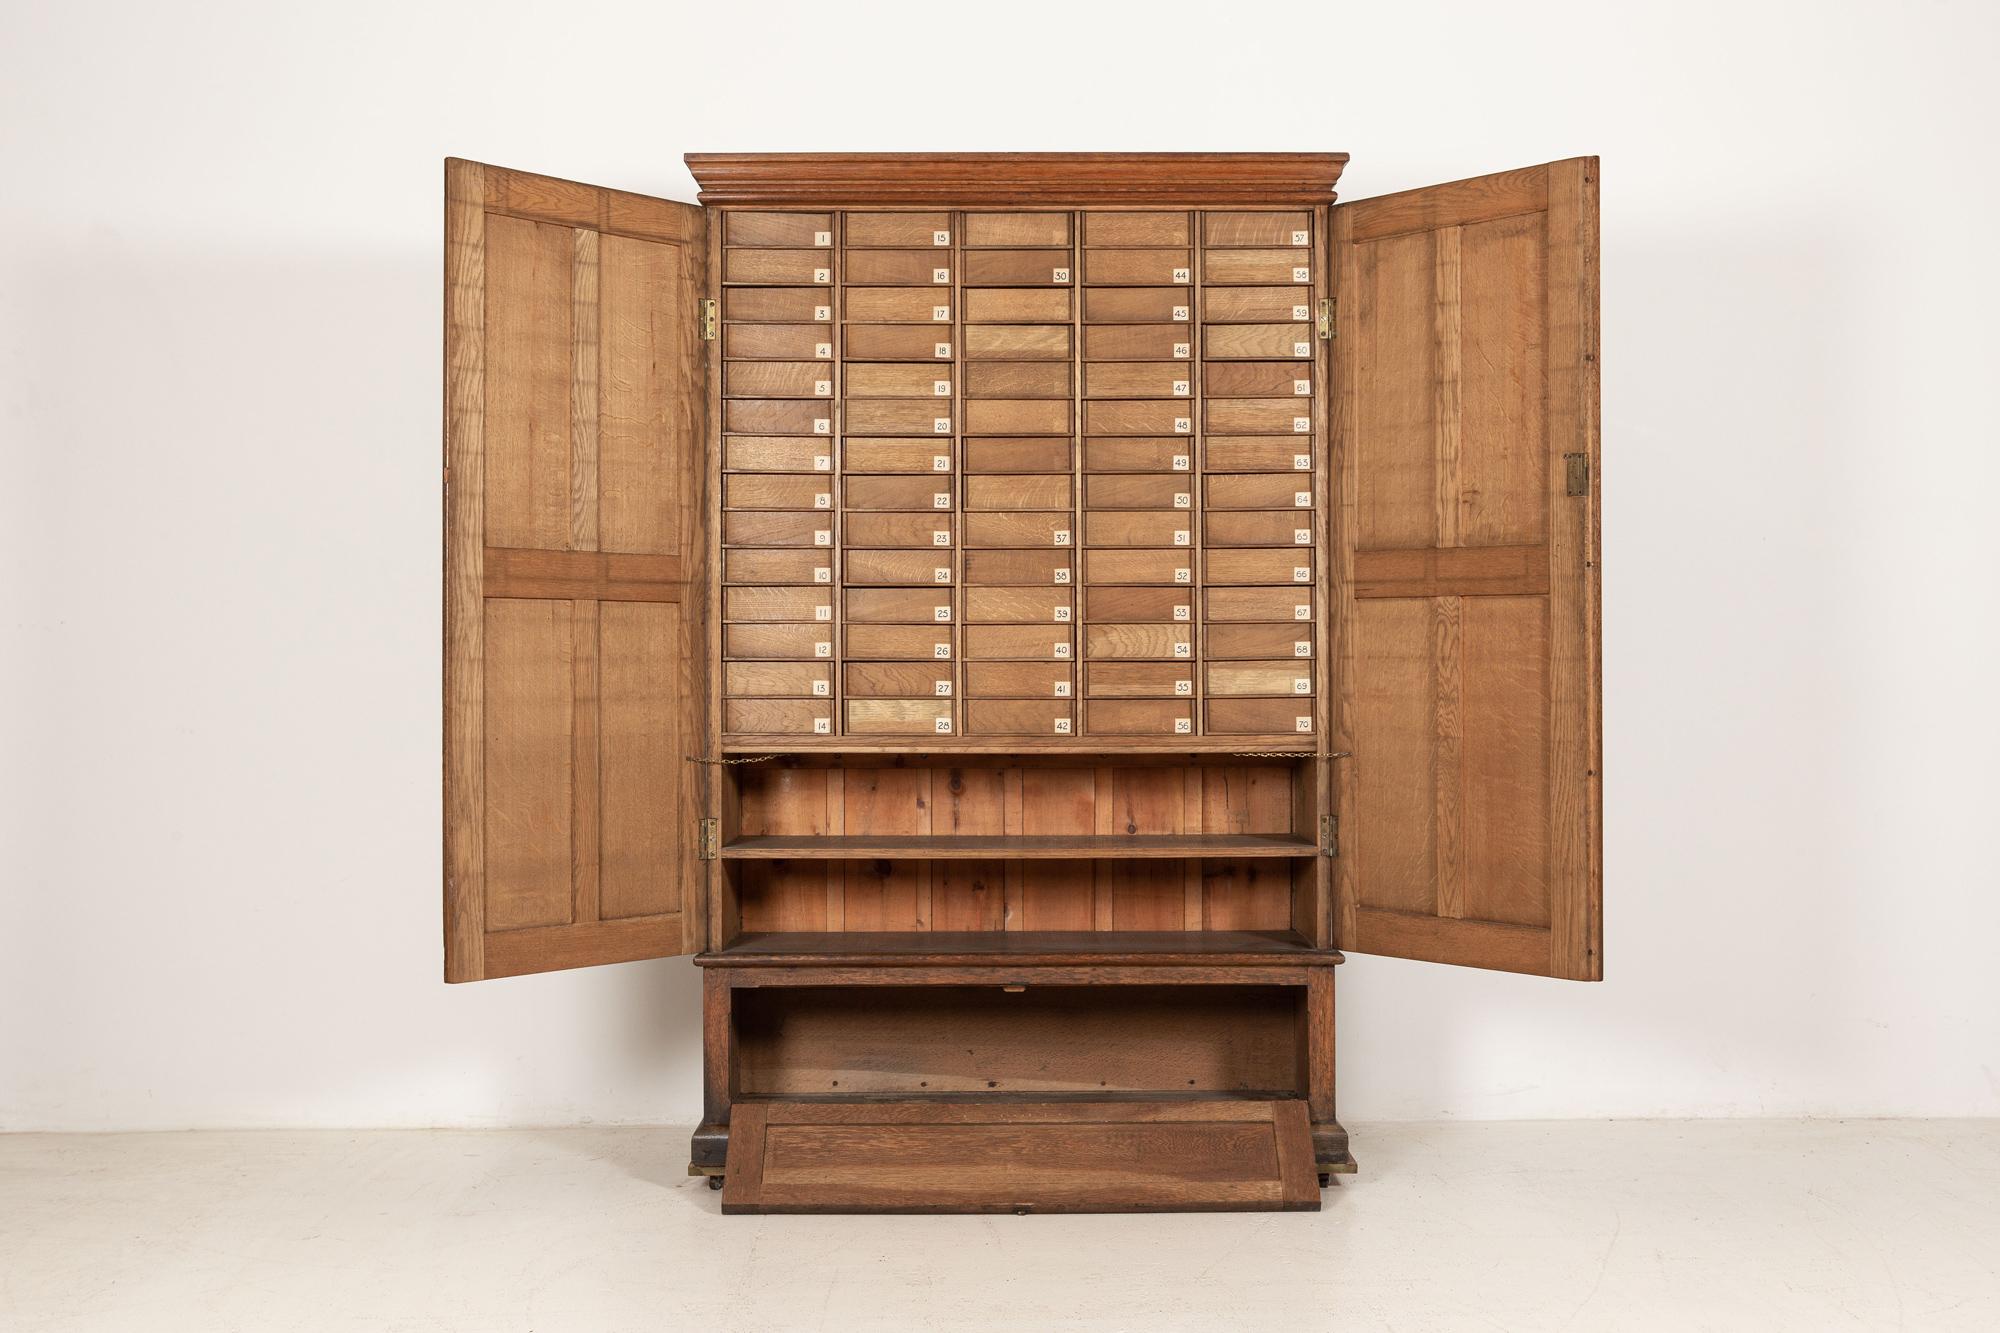 circa 1900

Large English oak Haberdashery Collectors cabinet with 70 drawers

Measures: W 126 x D 38 x H 191 cm.

       